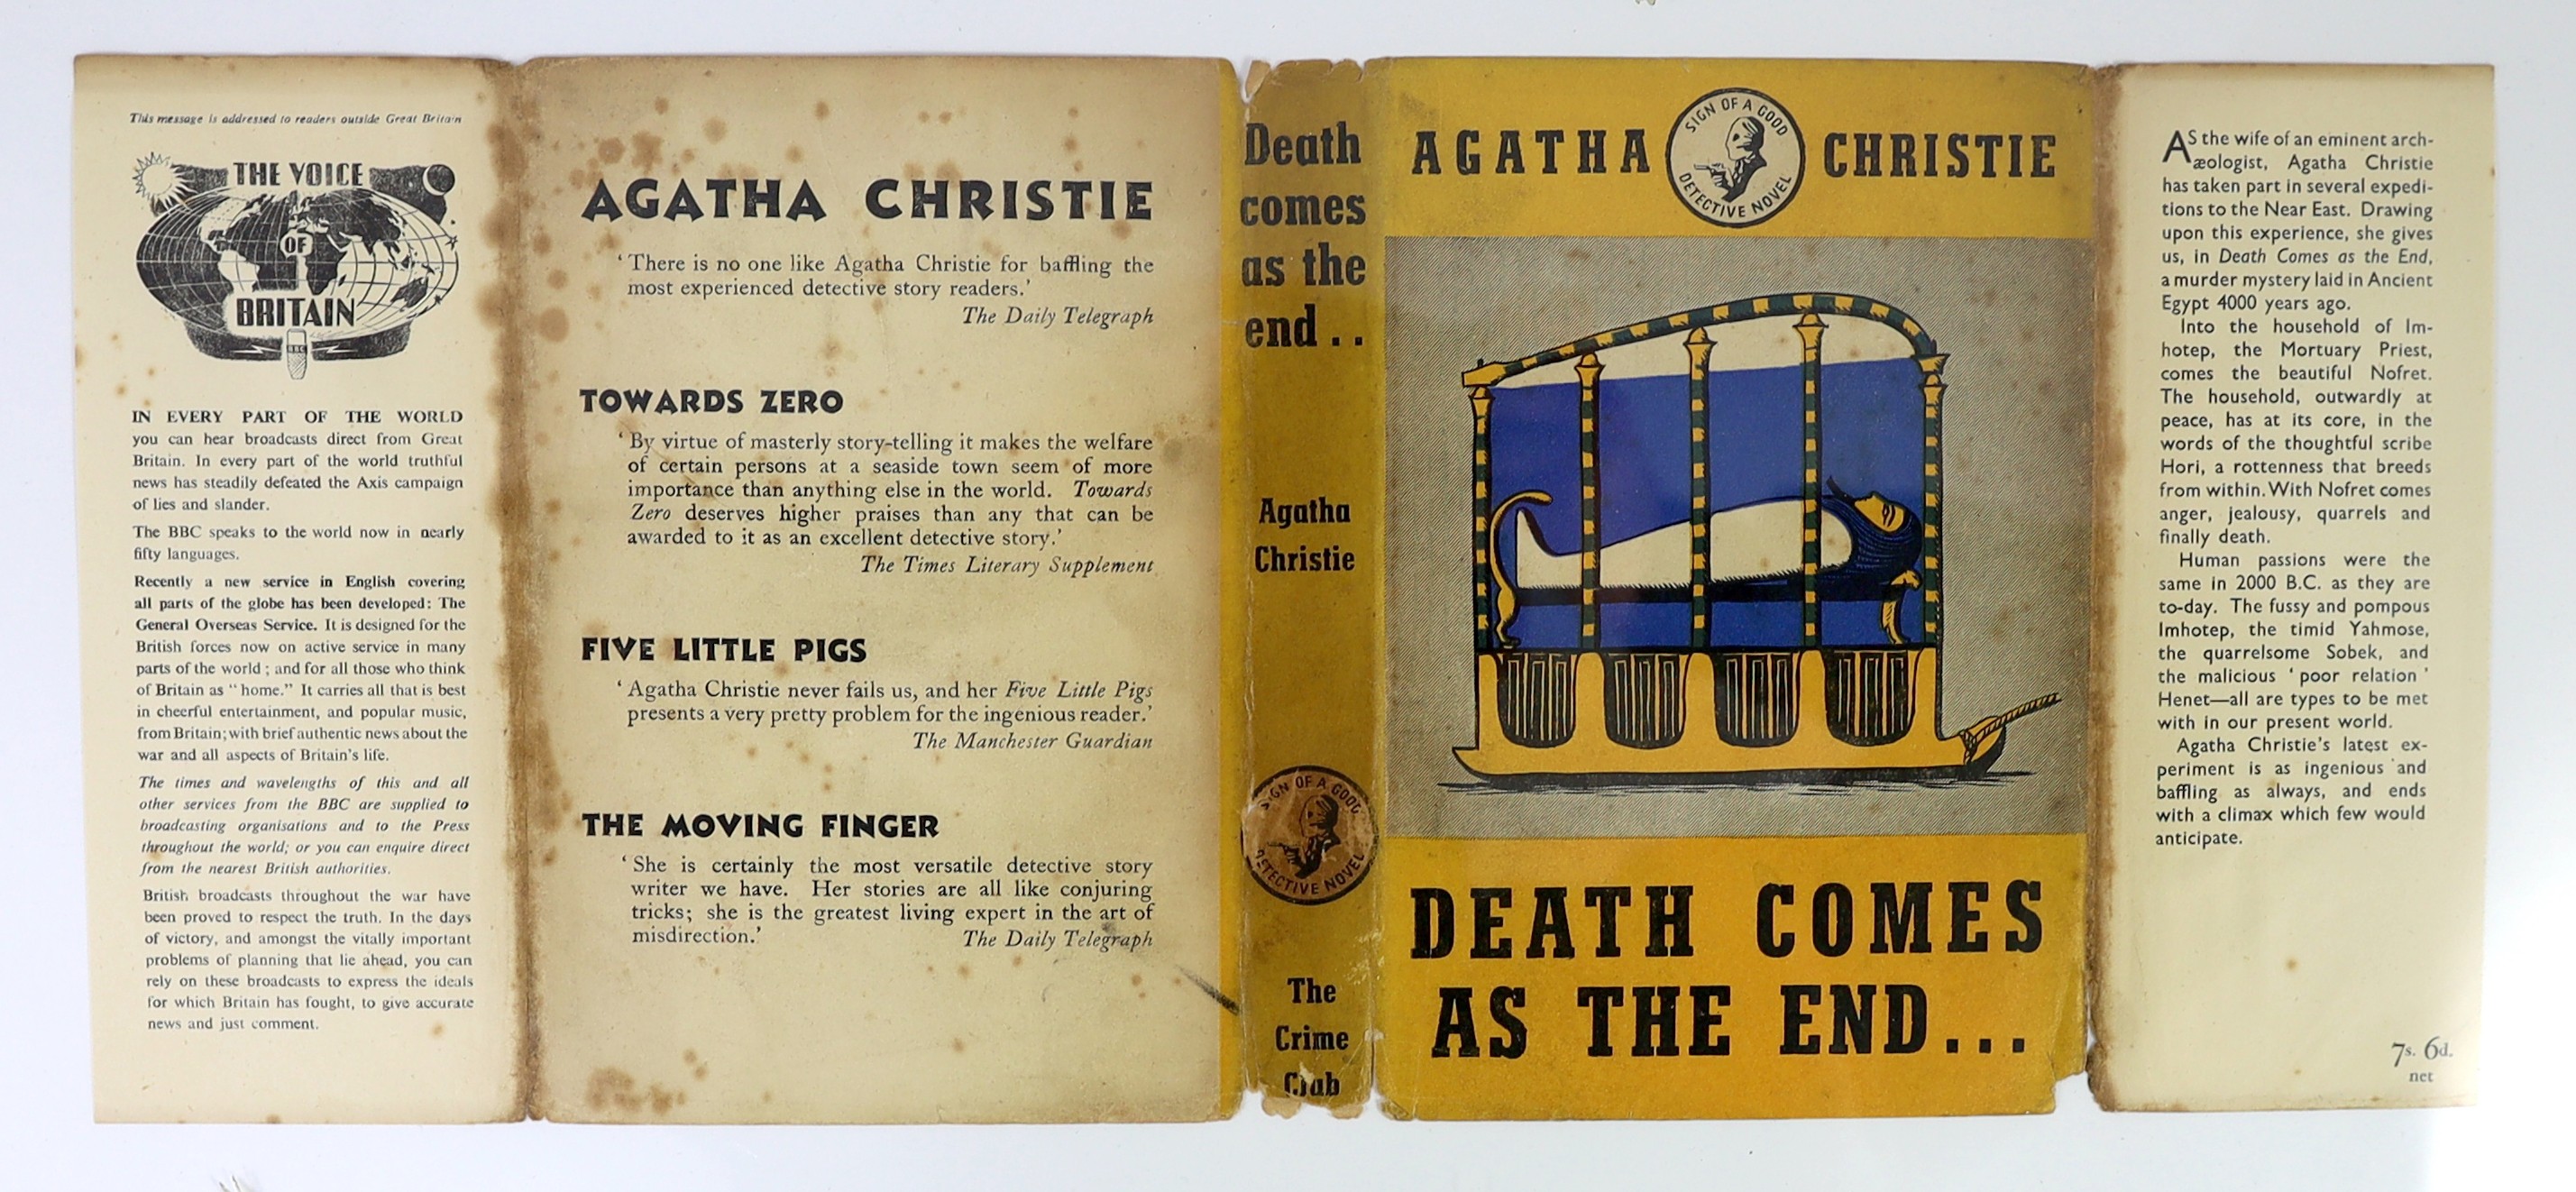 Christie, Agatha - Death Comes At The End, 1st edition